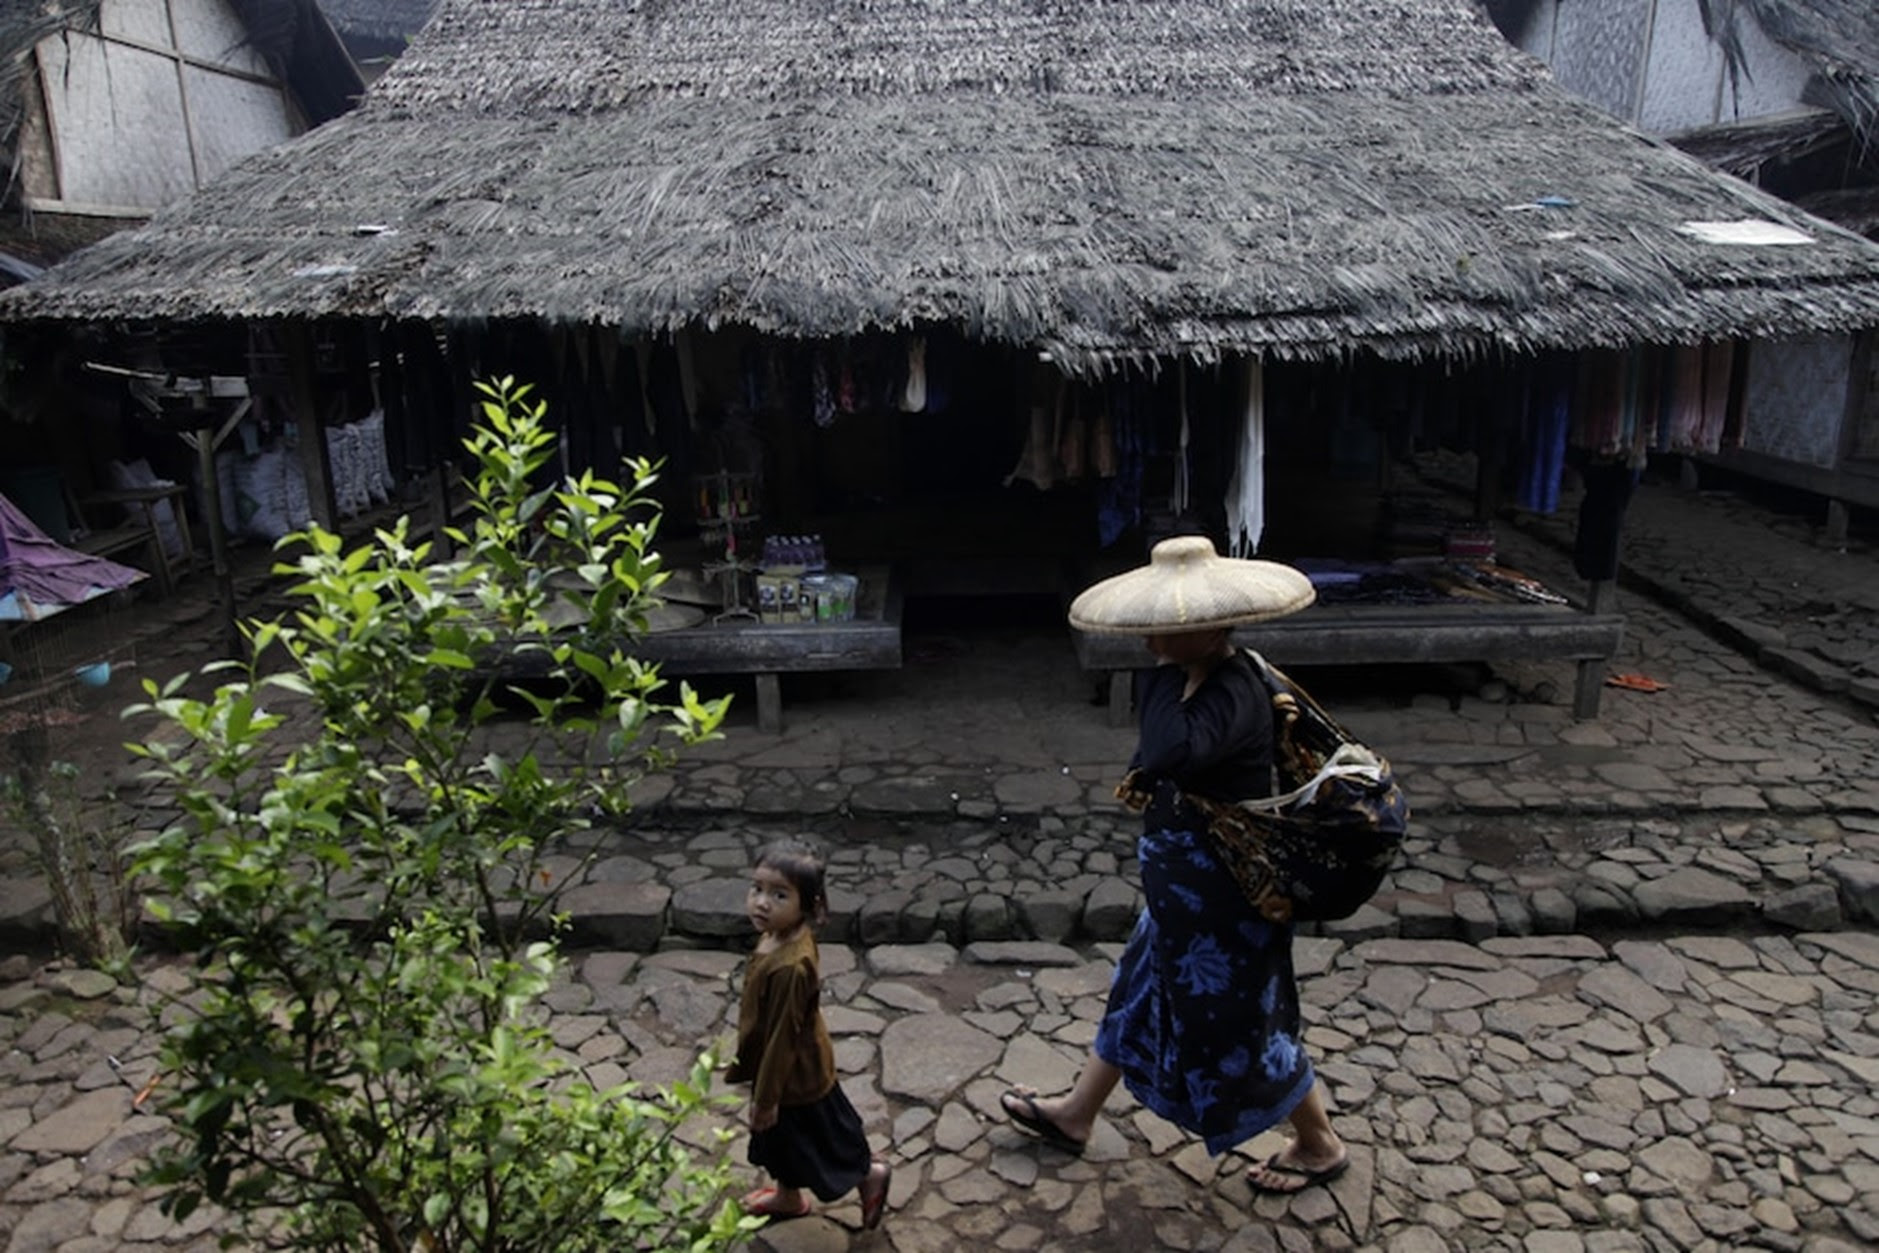 Indonesia's Baduy Indigenous group requests internet blackout to minimise online negative impact